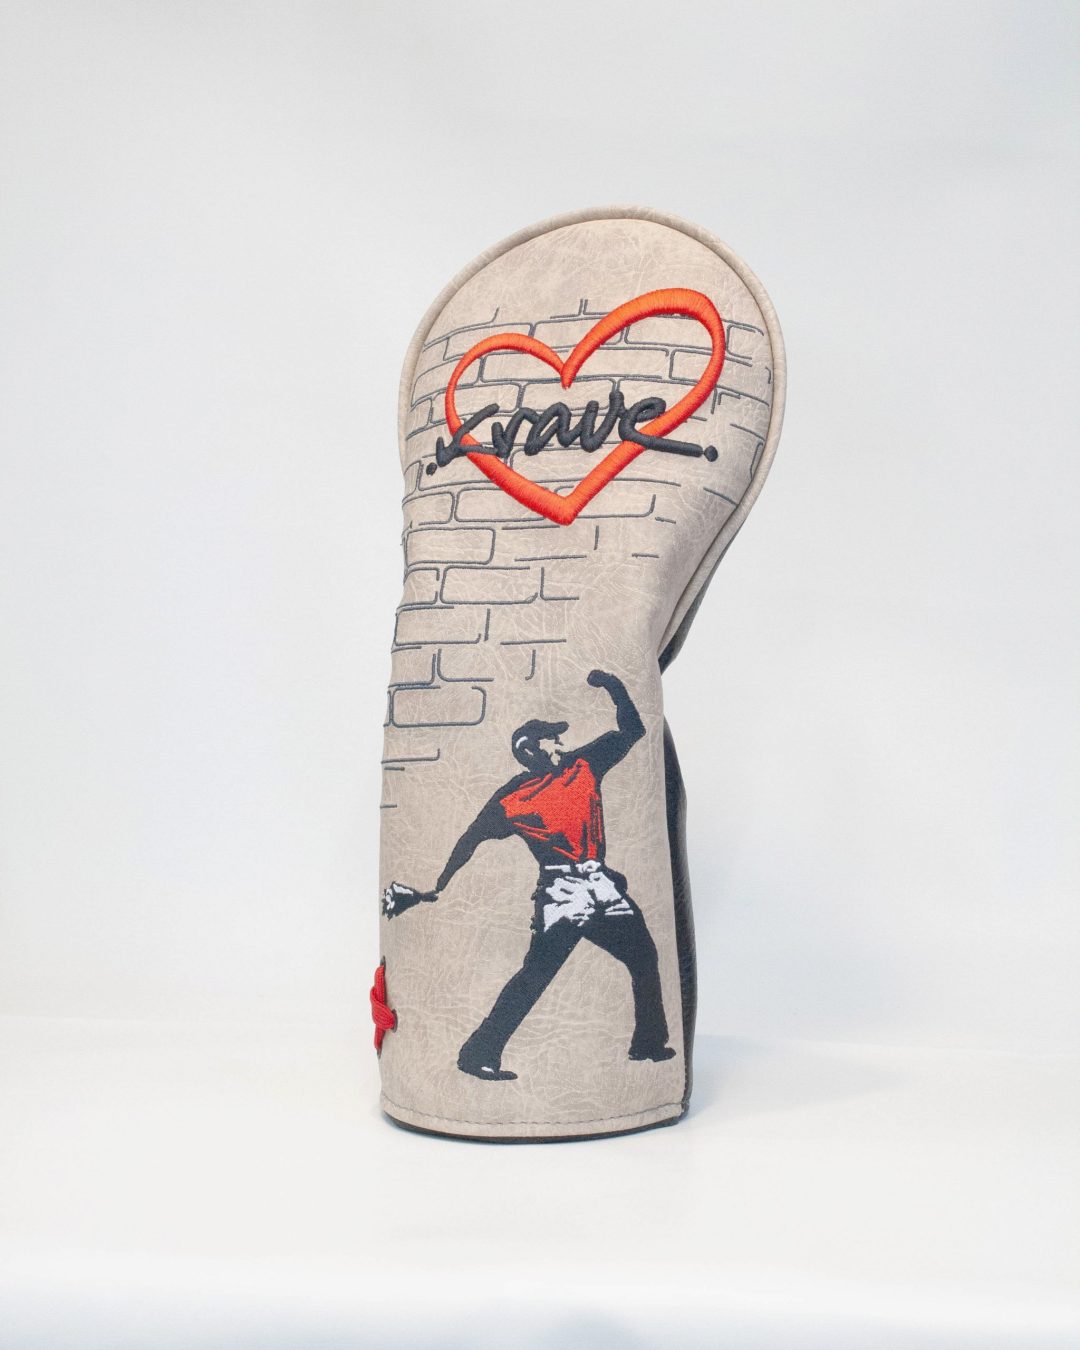 Mr Sunday by Shanksy a Banksy Style Golf Headcover